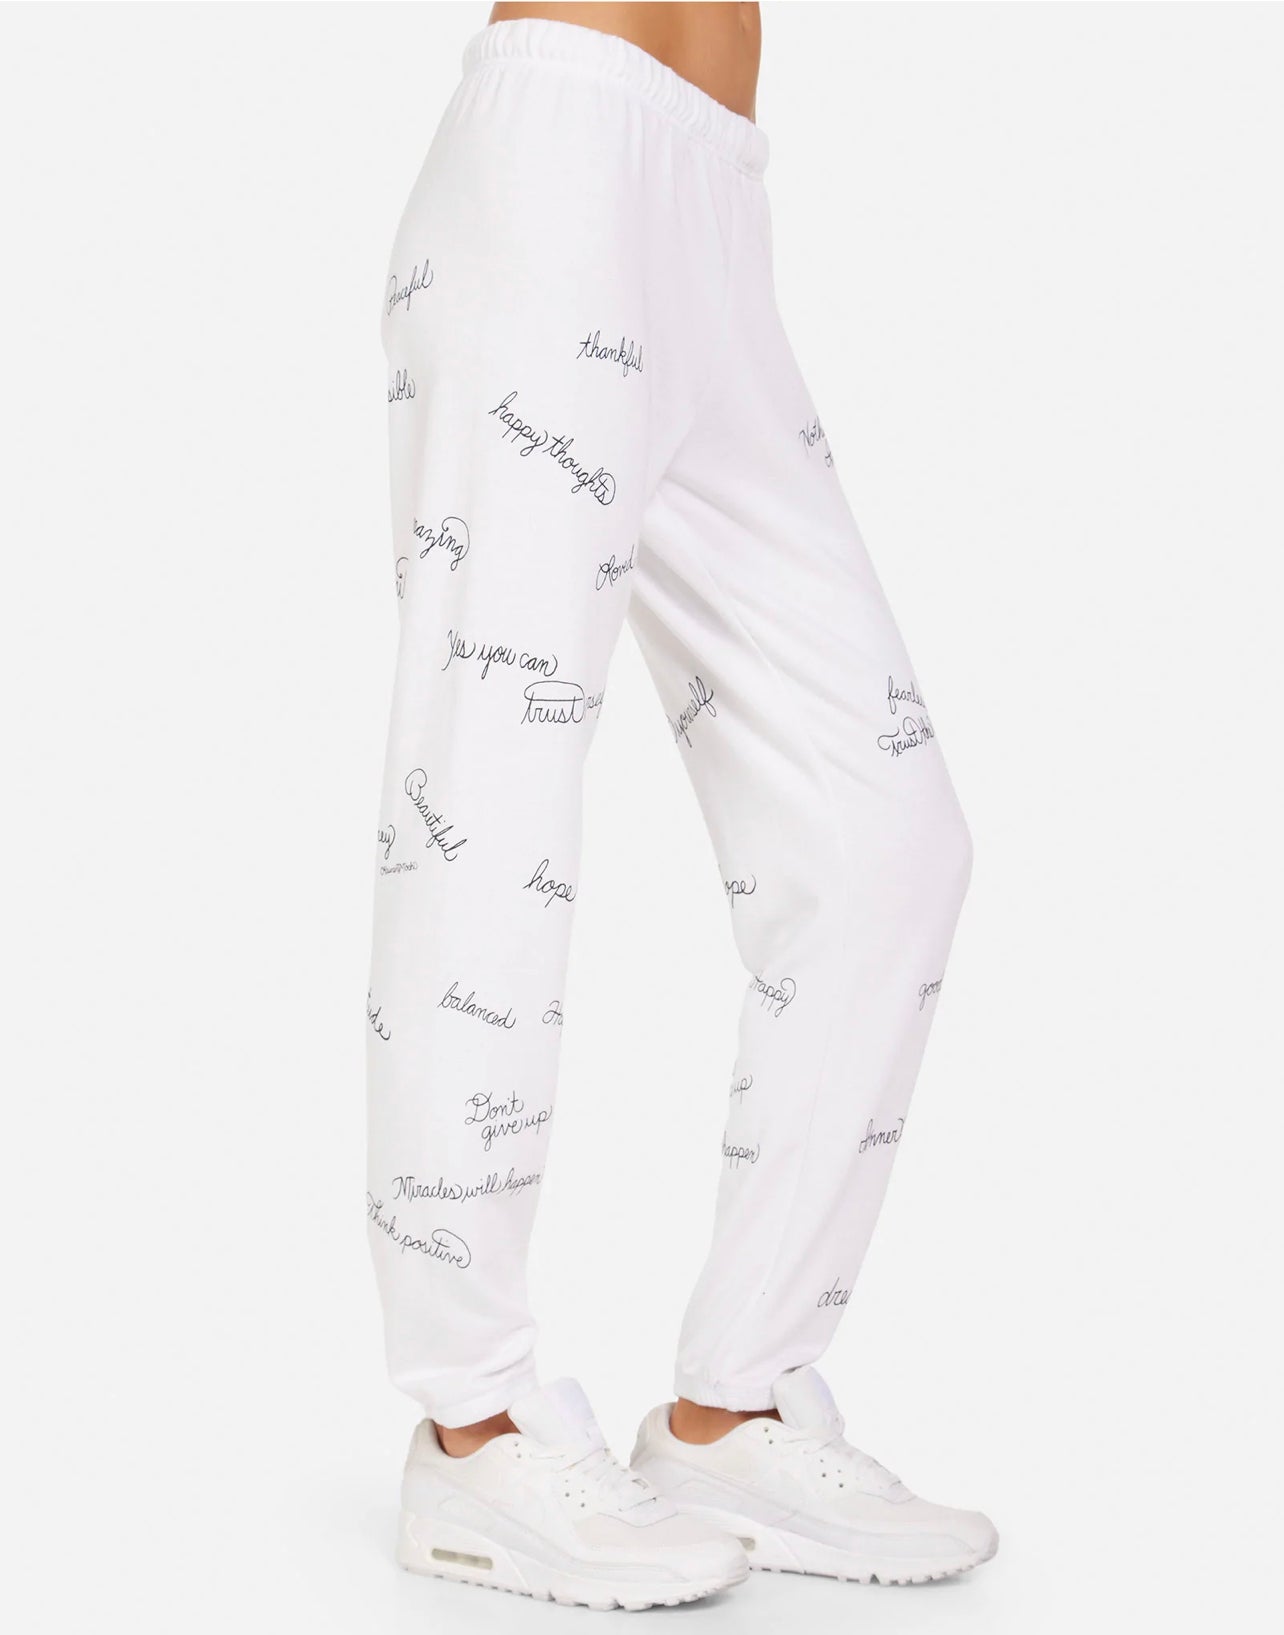 WHITE HAPPY THOUGHTS SWEATPANTS